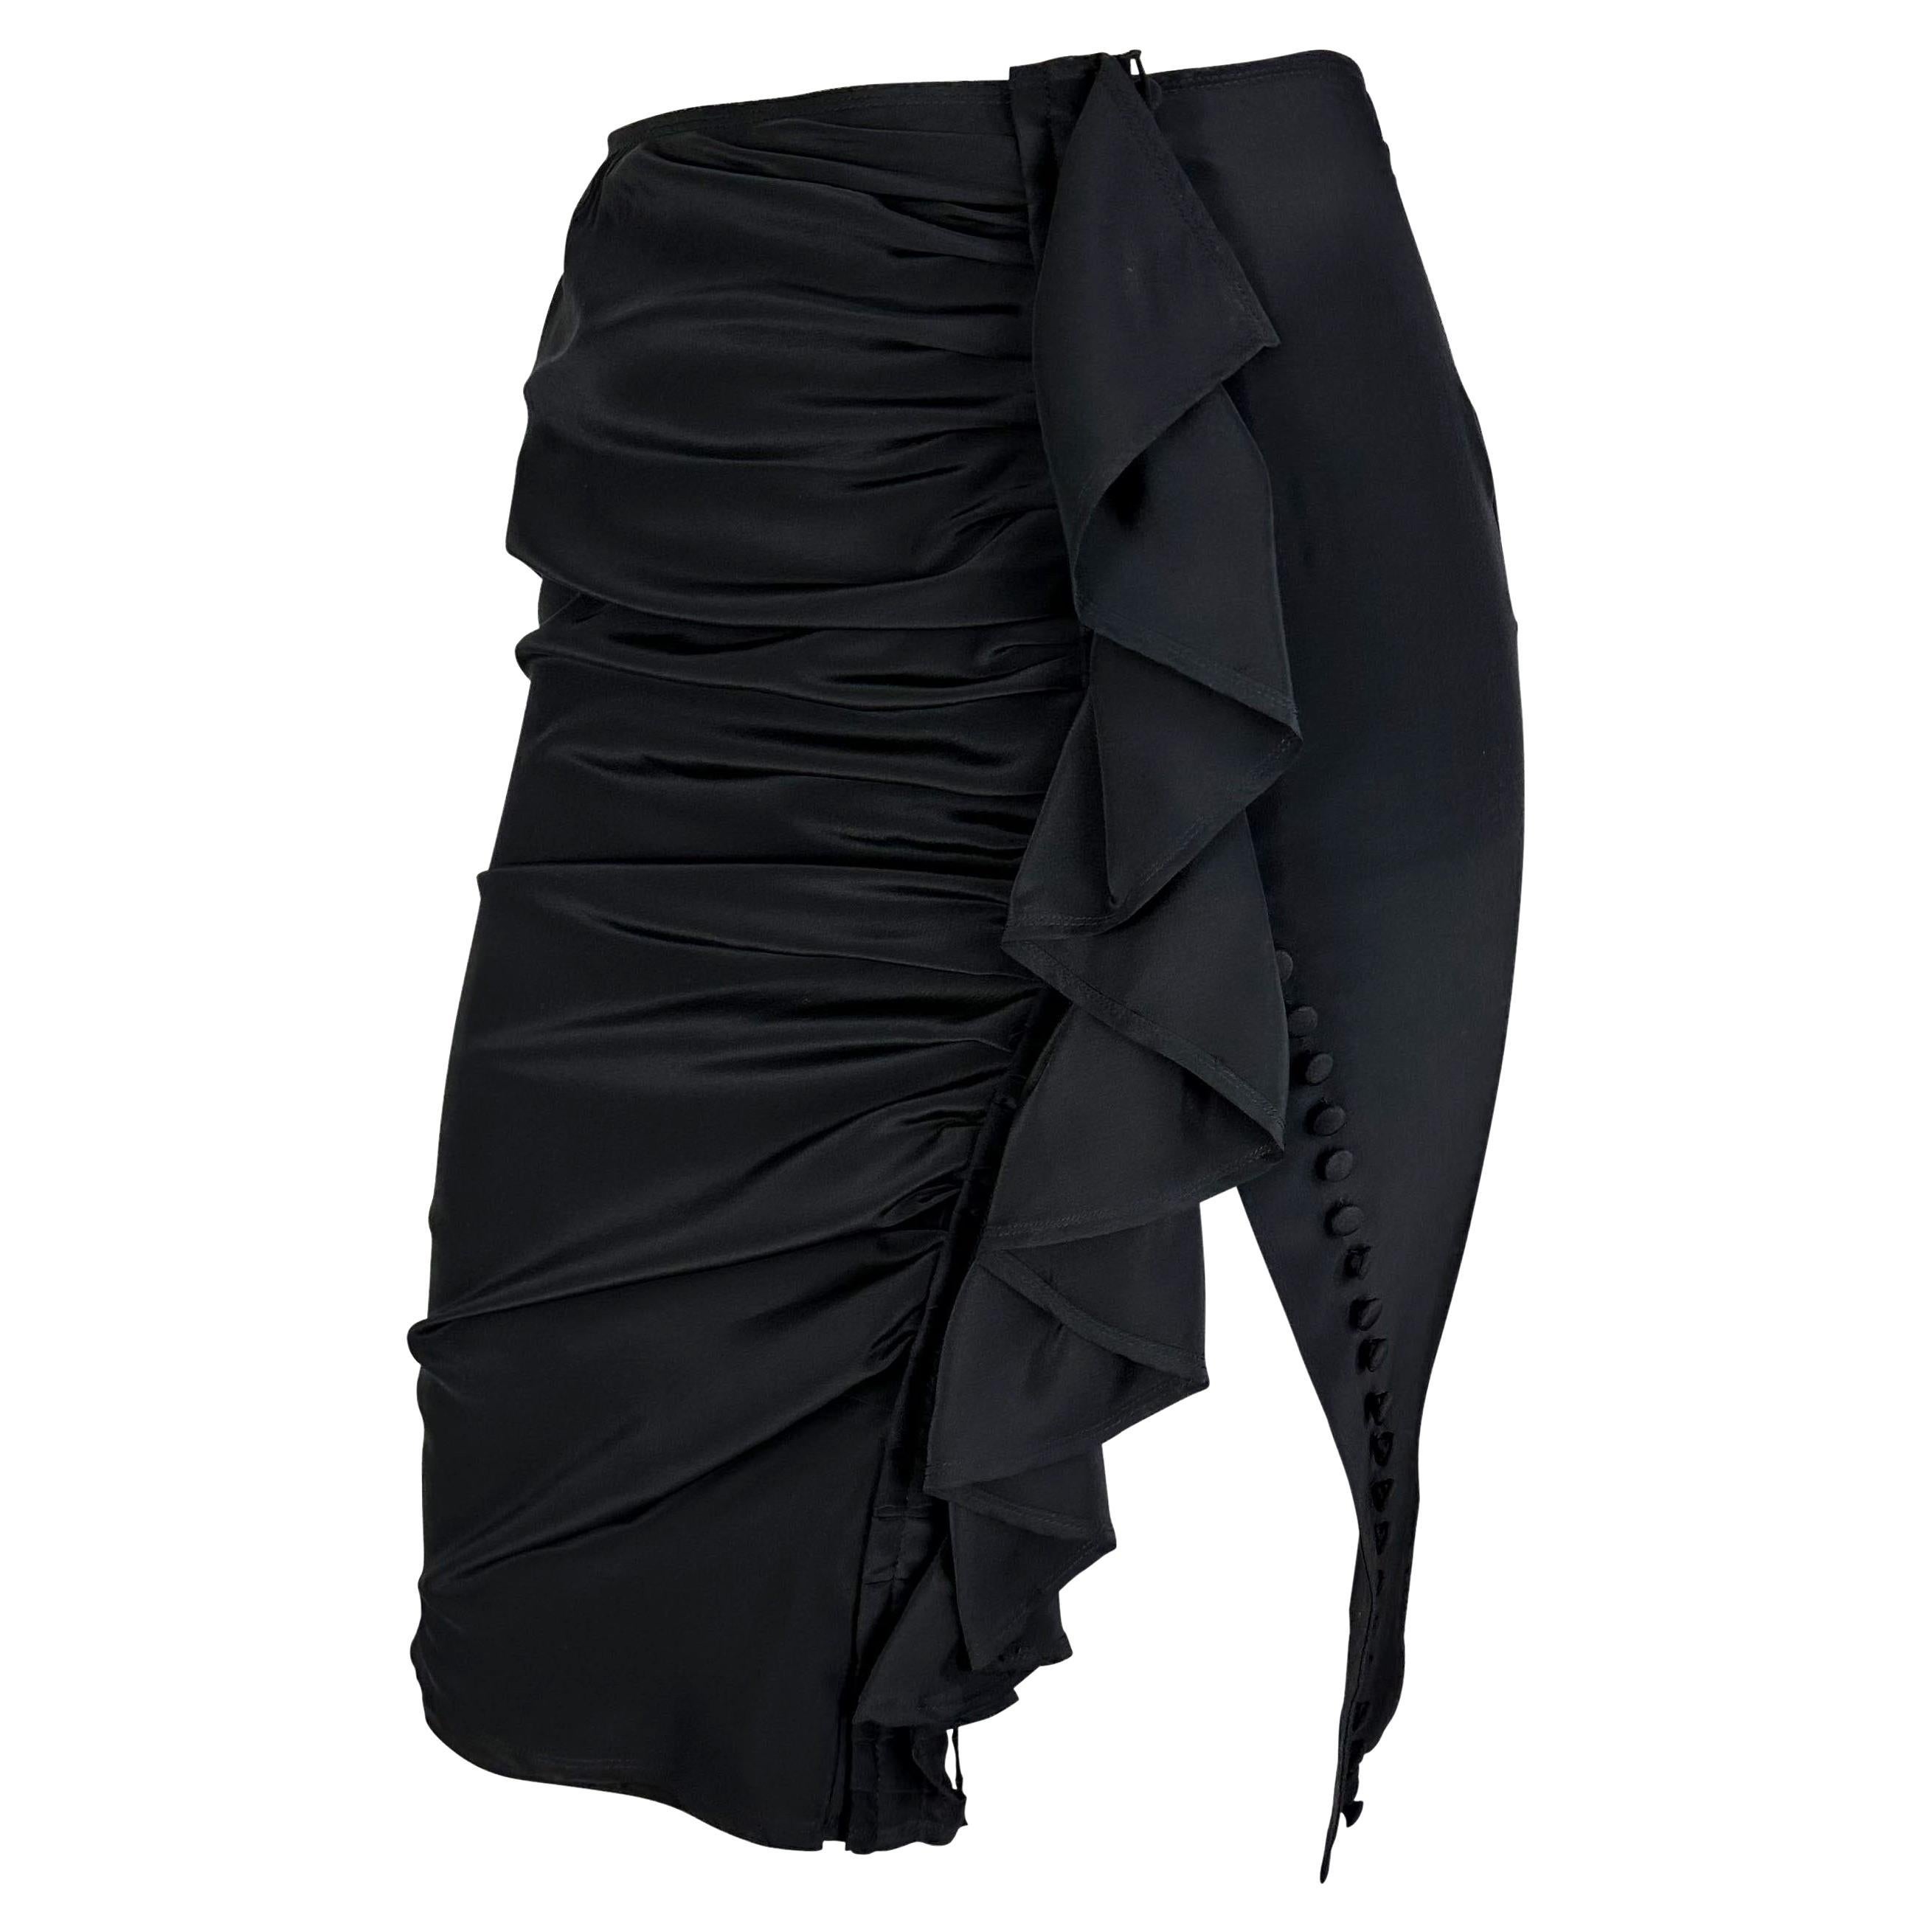 Presenting an incredible black silk Yves Saint Laurent Rive Gauche skirt designed by Tom Ford. From the early 2000s, this skirt features ruching at the front, a vertical ruffle detail, and a top-to-bottom button closure. Add this fabulous and